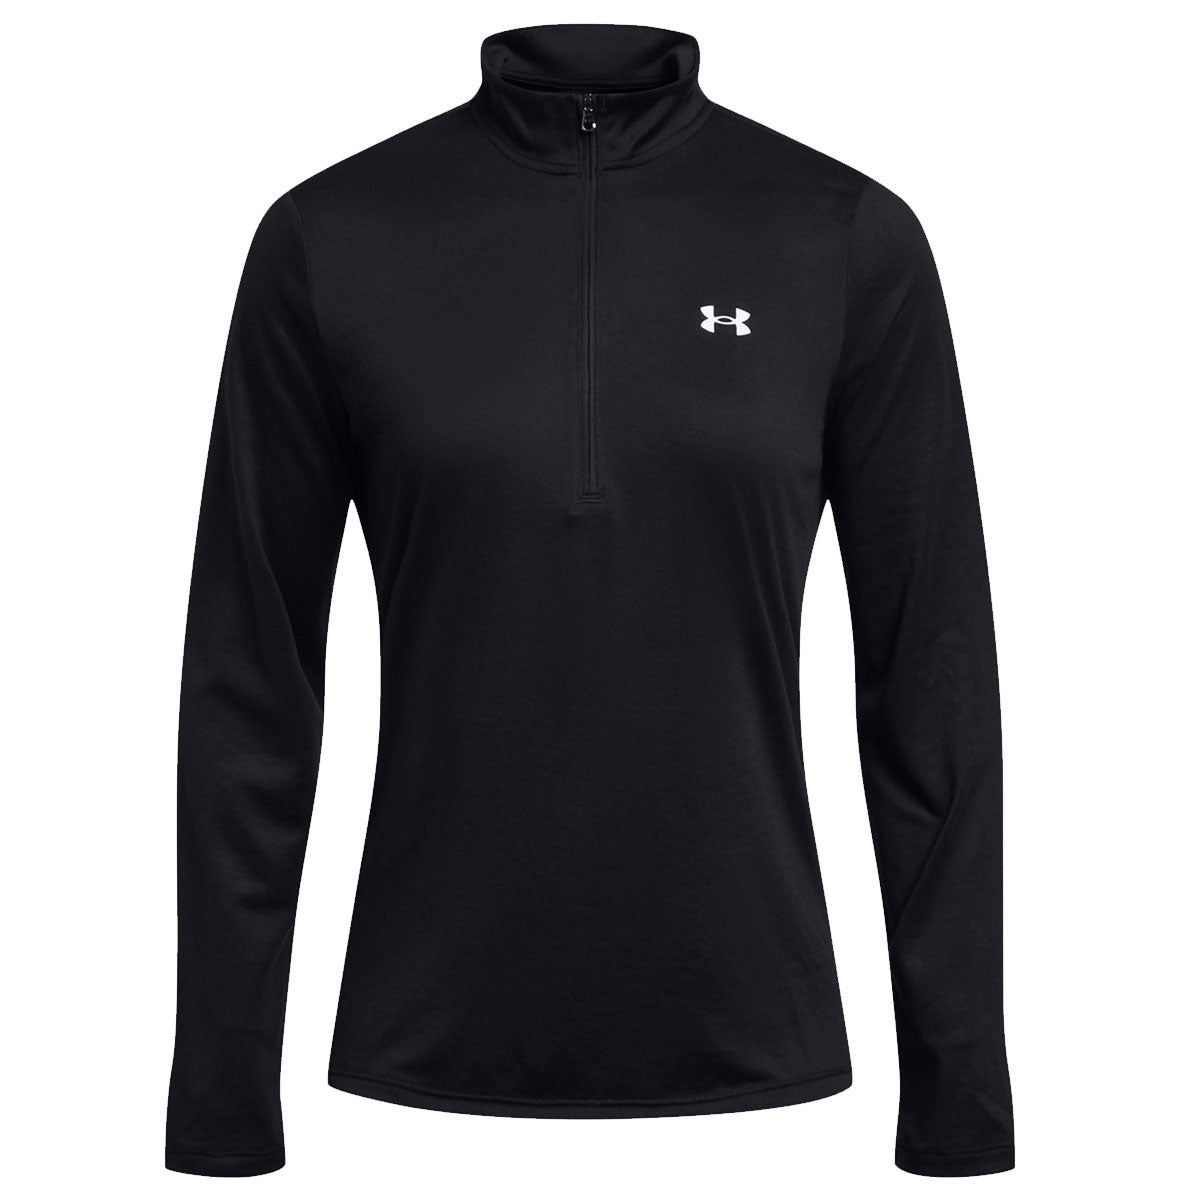 Under Armour Tech 1/2 Zip Solid Top - Womens - Black/White